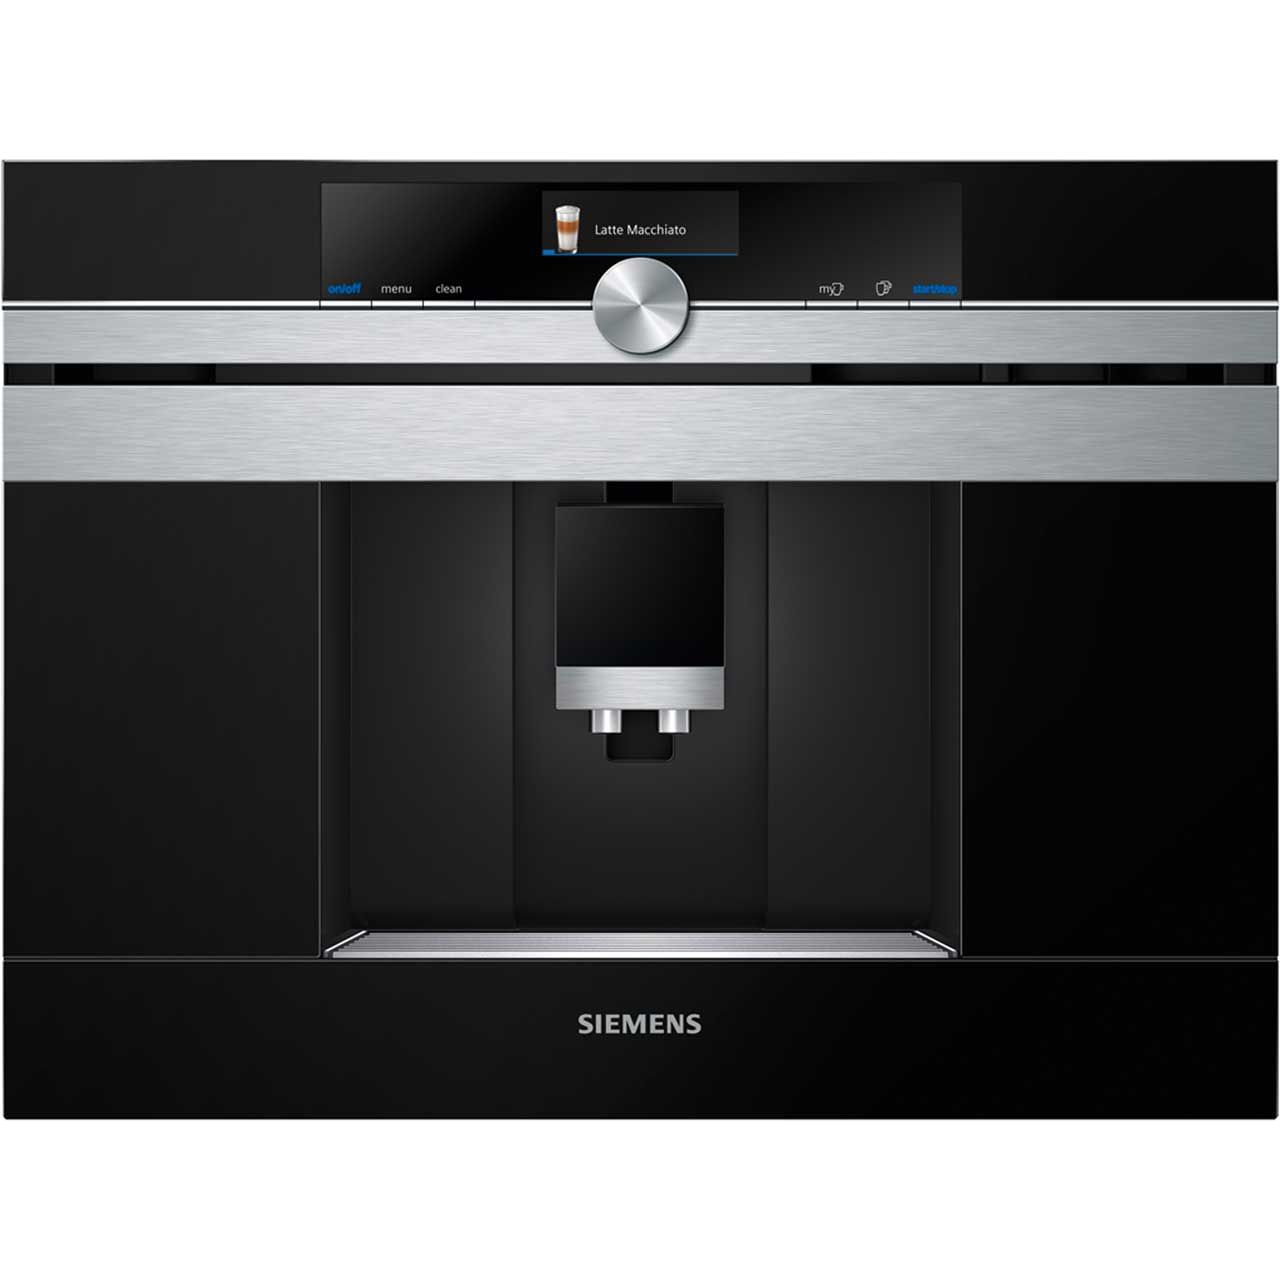 Siemens IQ-700 CT636LES6 Wifi Connected Built In Bean to Cup Coffee Machine Review